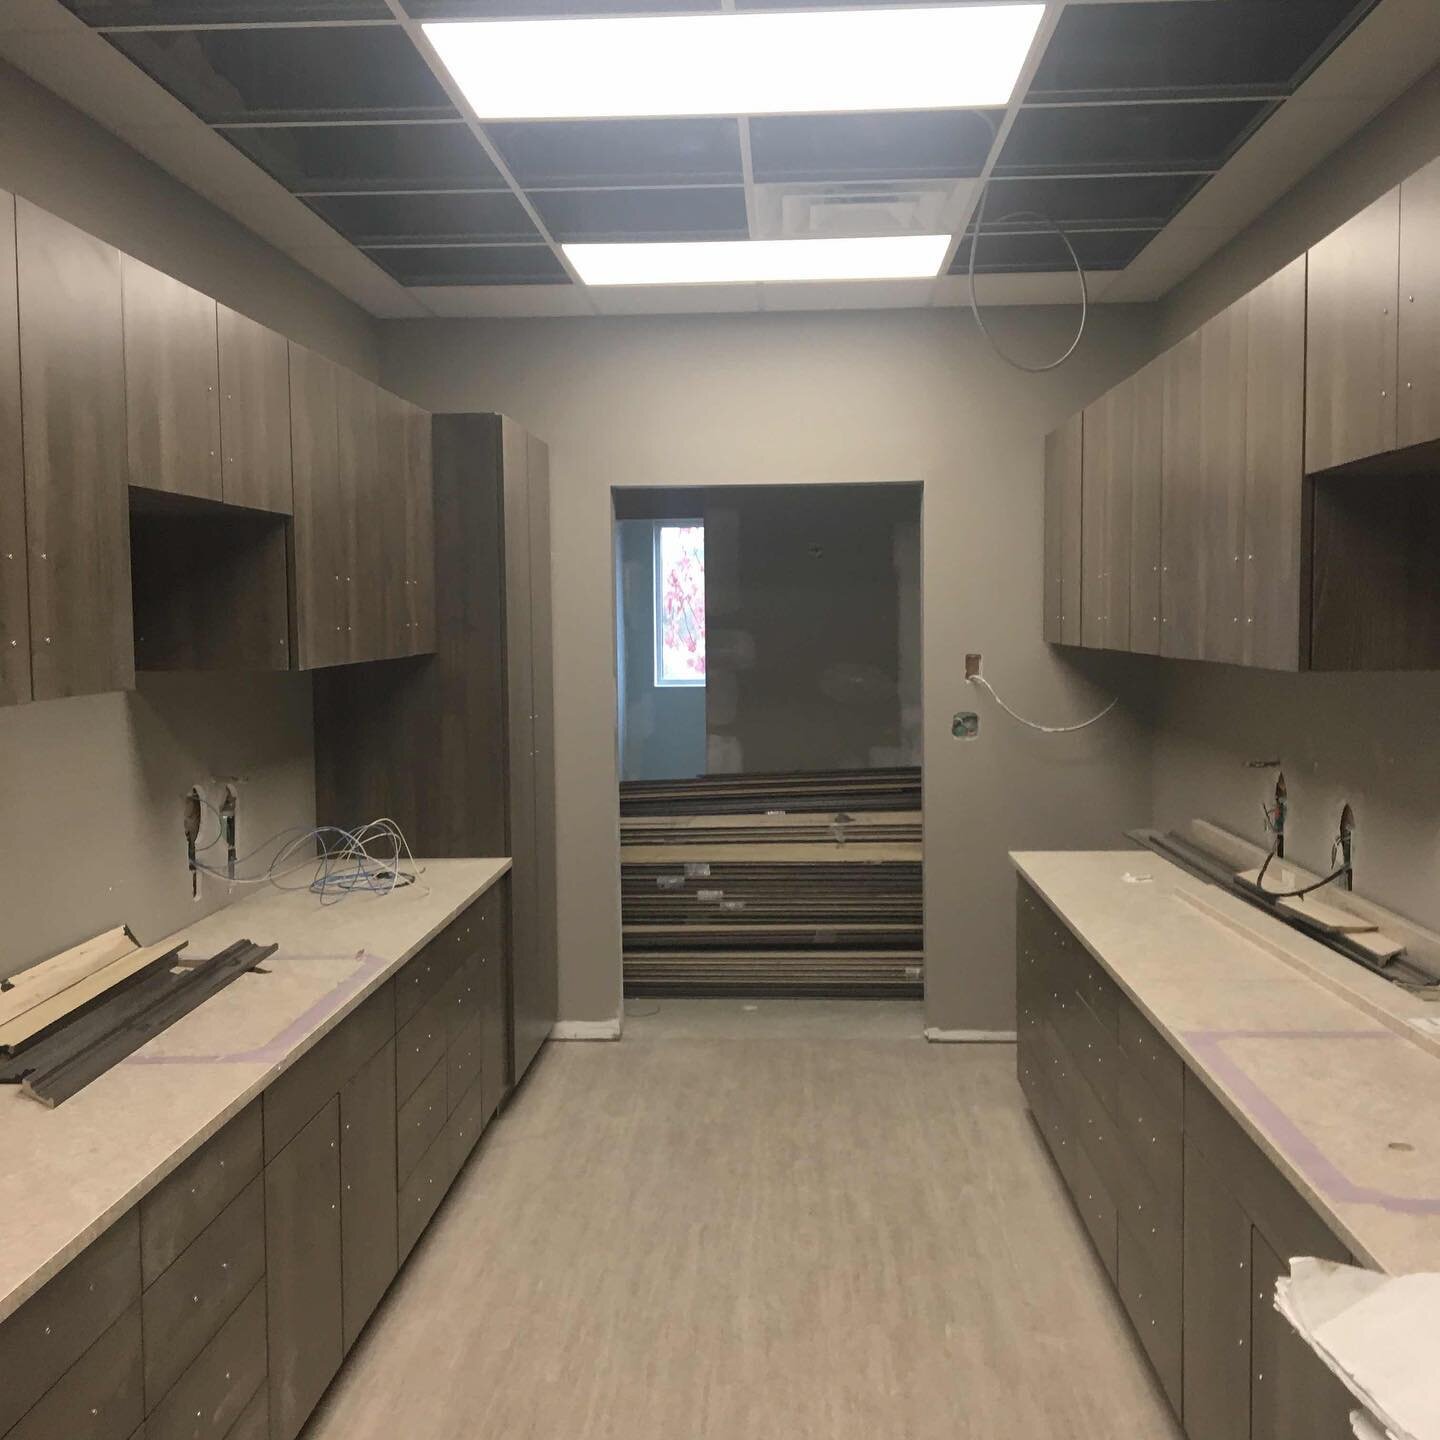 Heartland Dental in Michigan is entering the finishing stages! #builtbetter